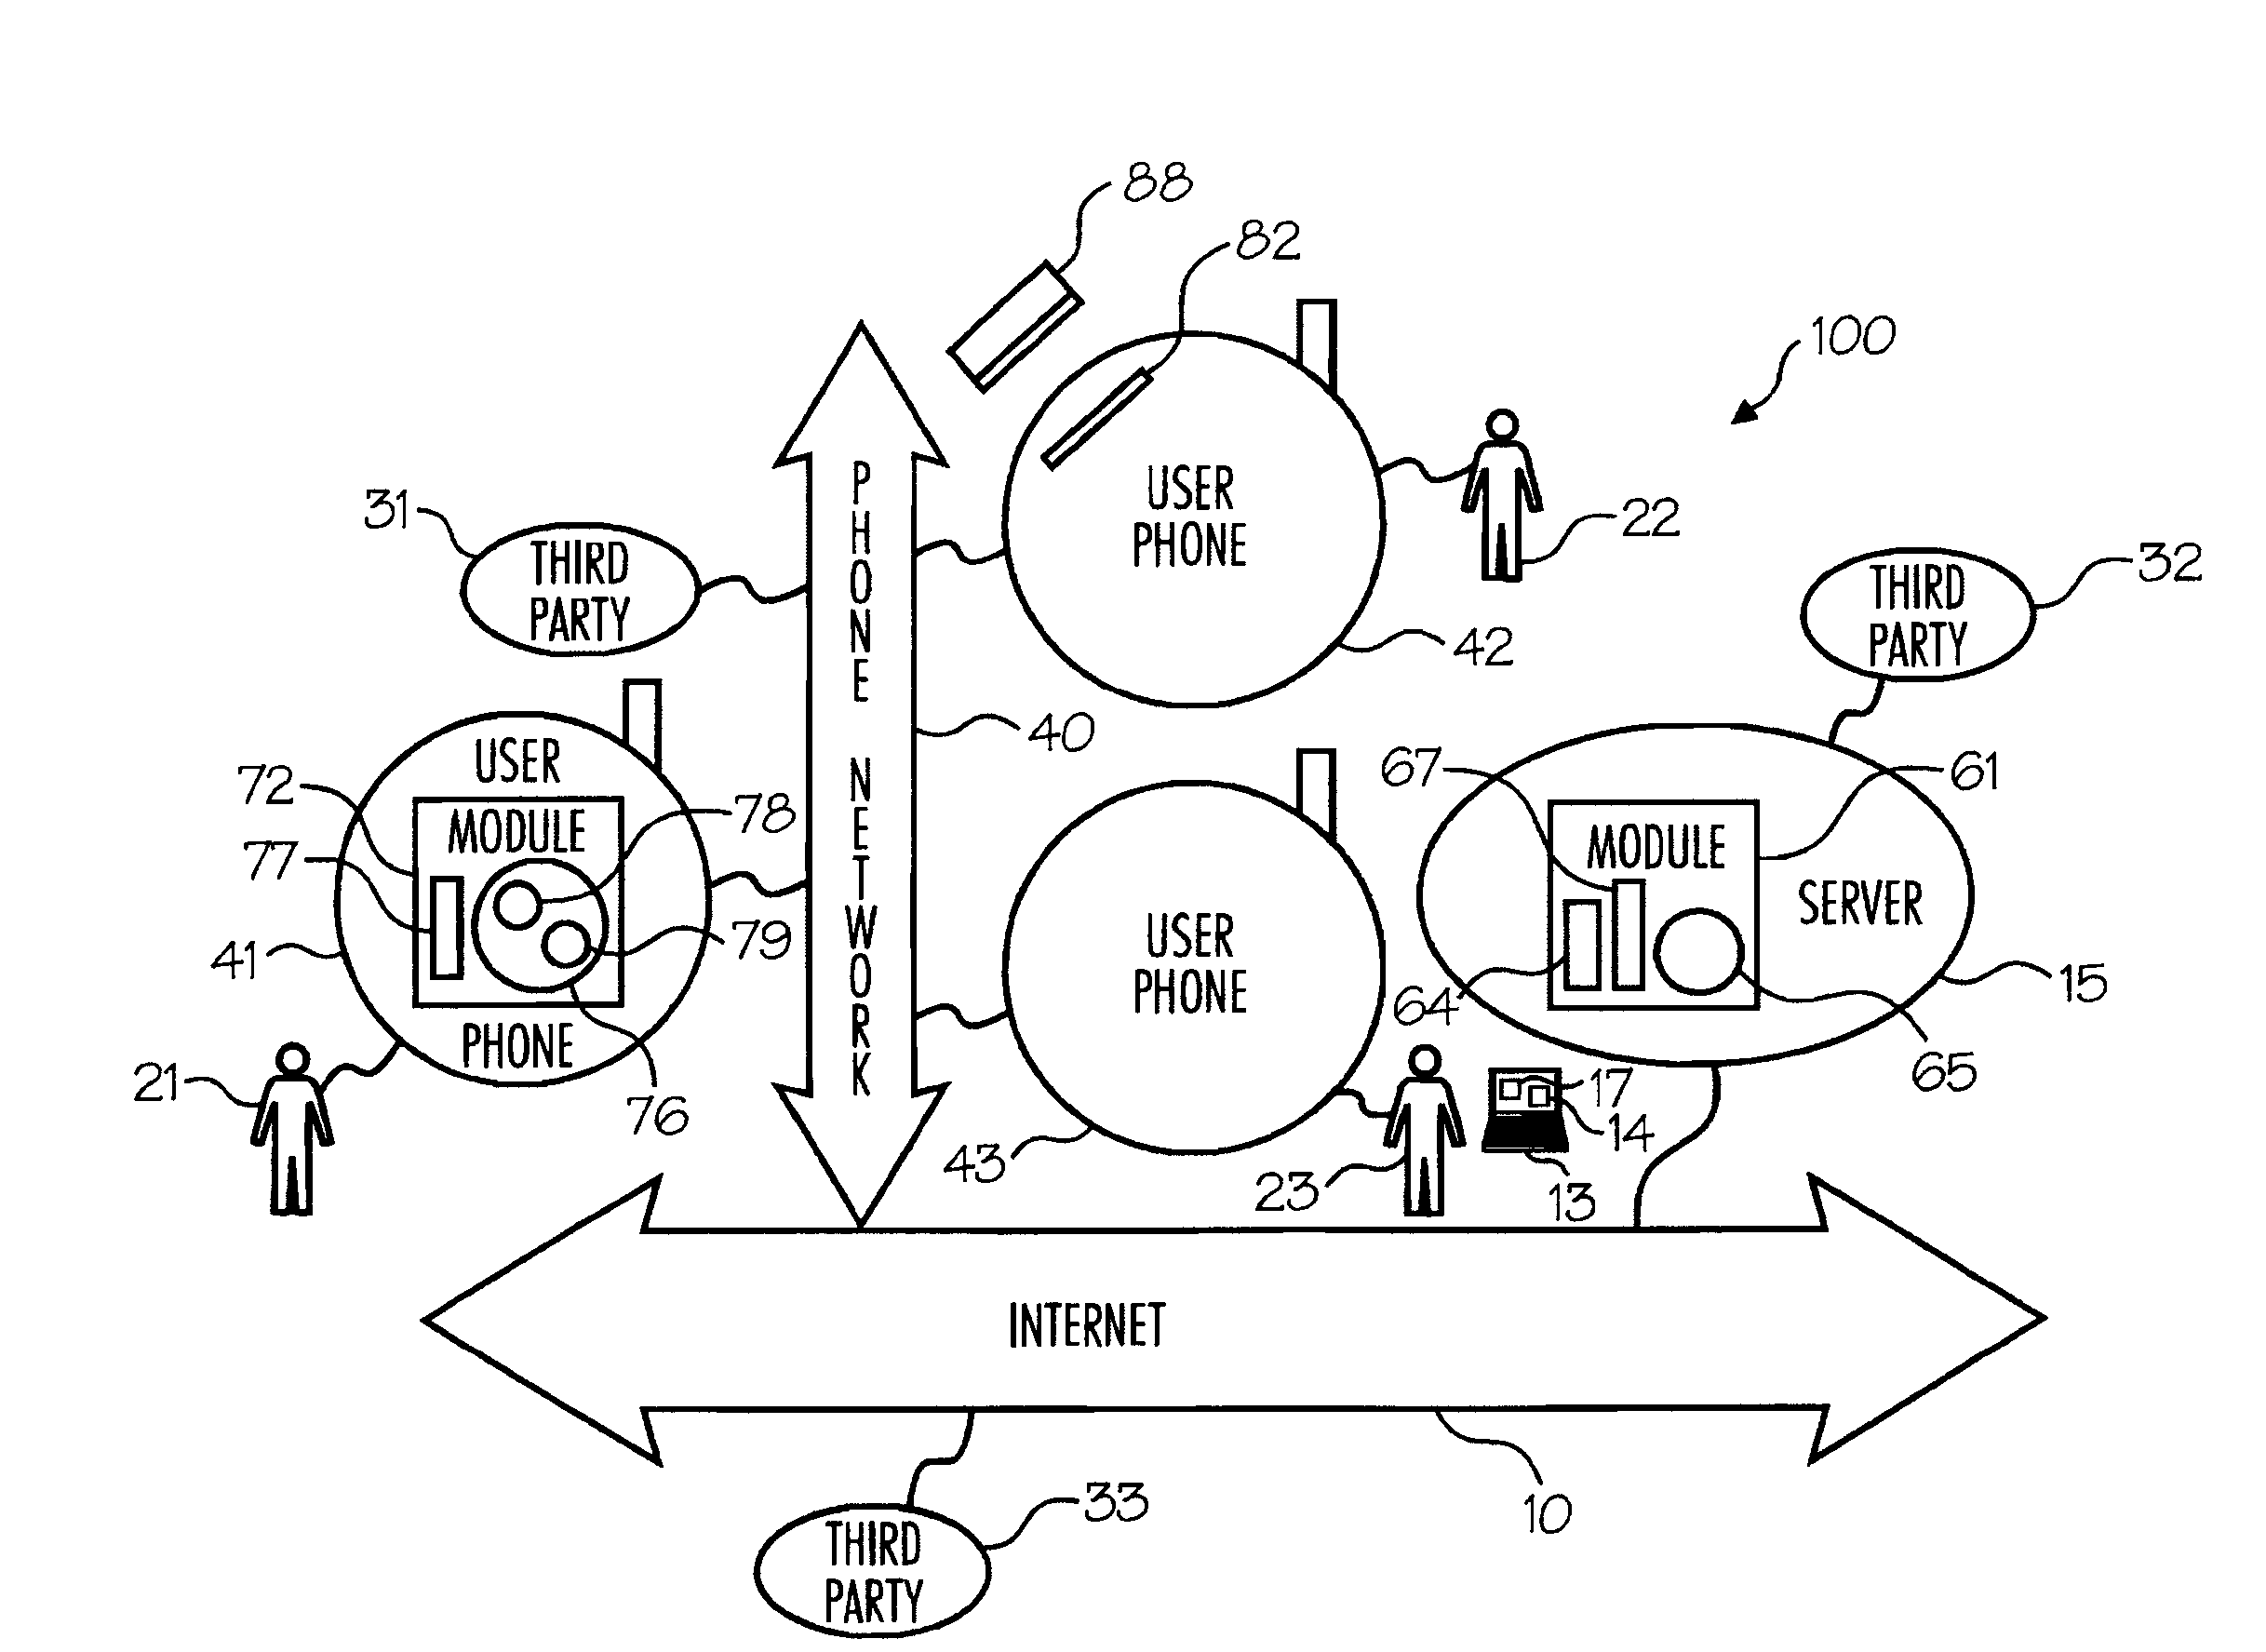 Methods to authenticate access and alarm as to proximity to location